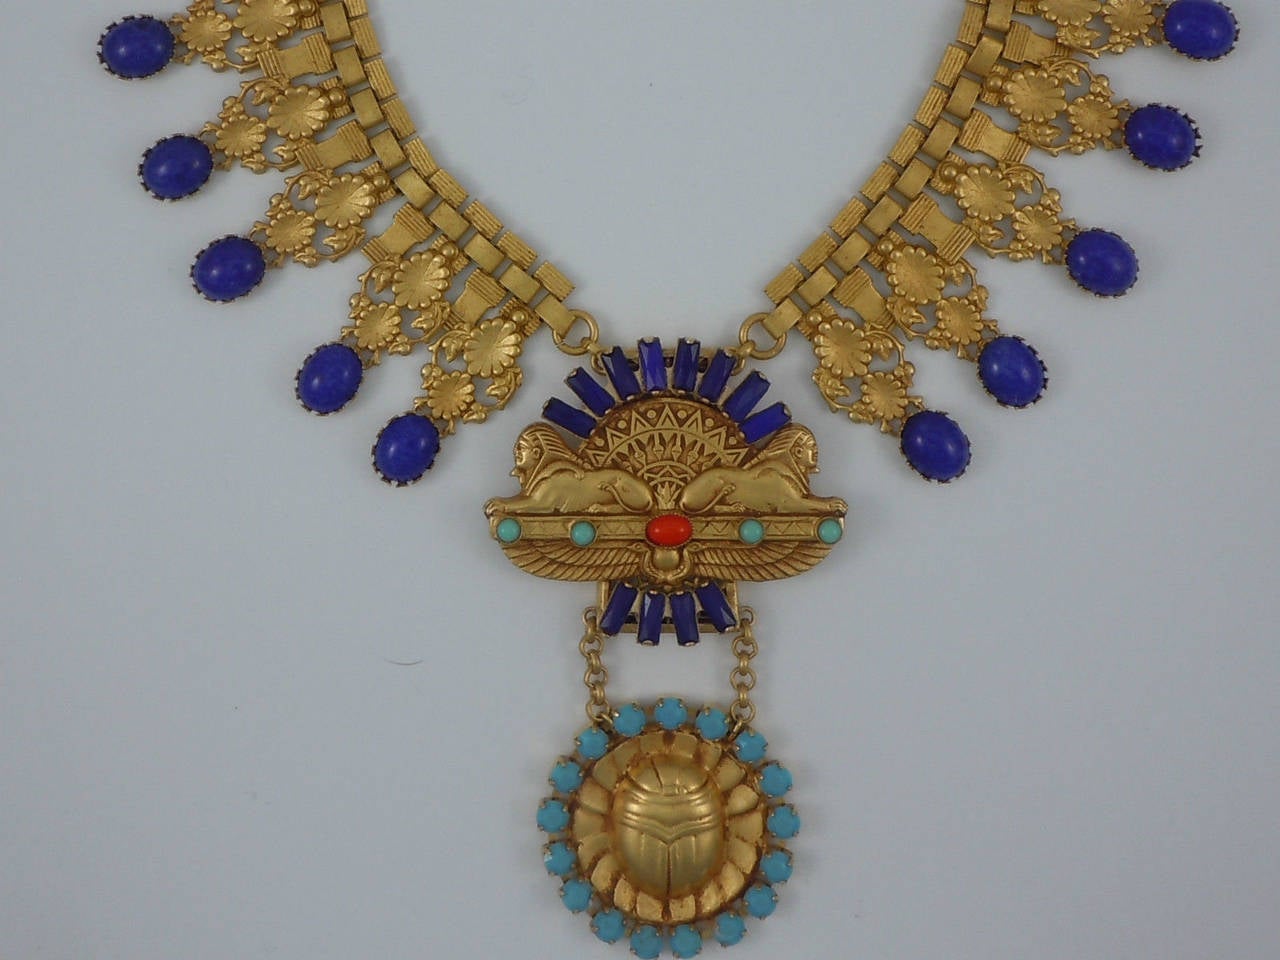 Featuring a Stunning 'Egyptian Revival' Double Sphinx Runway Necklace by Askew London; Antiqued Gilt brass Double Sphinx with glass baguette and cabochon stone decoration. The Sphinx are flanked by lengths of flat chain decoration with Gilt brass